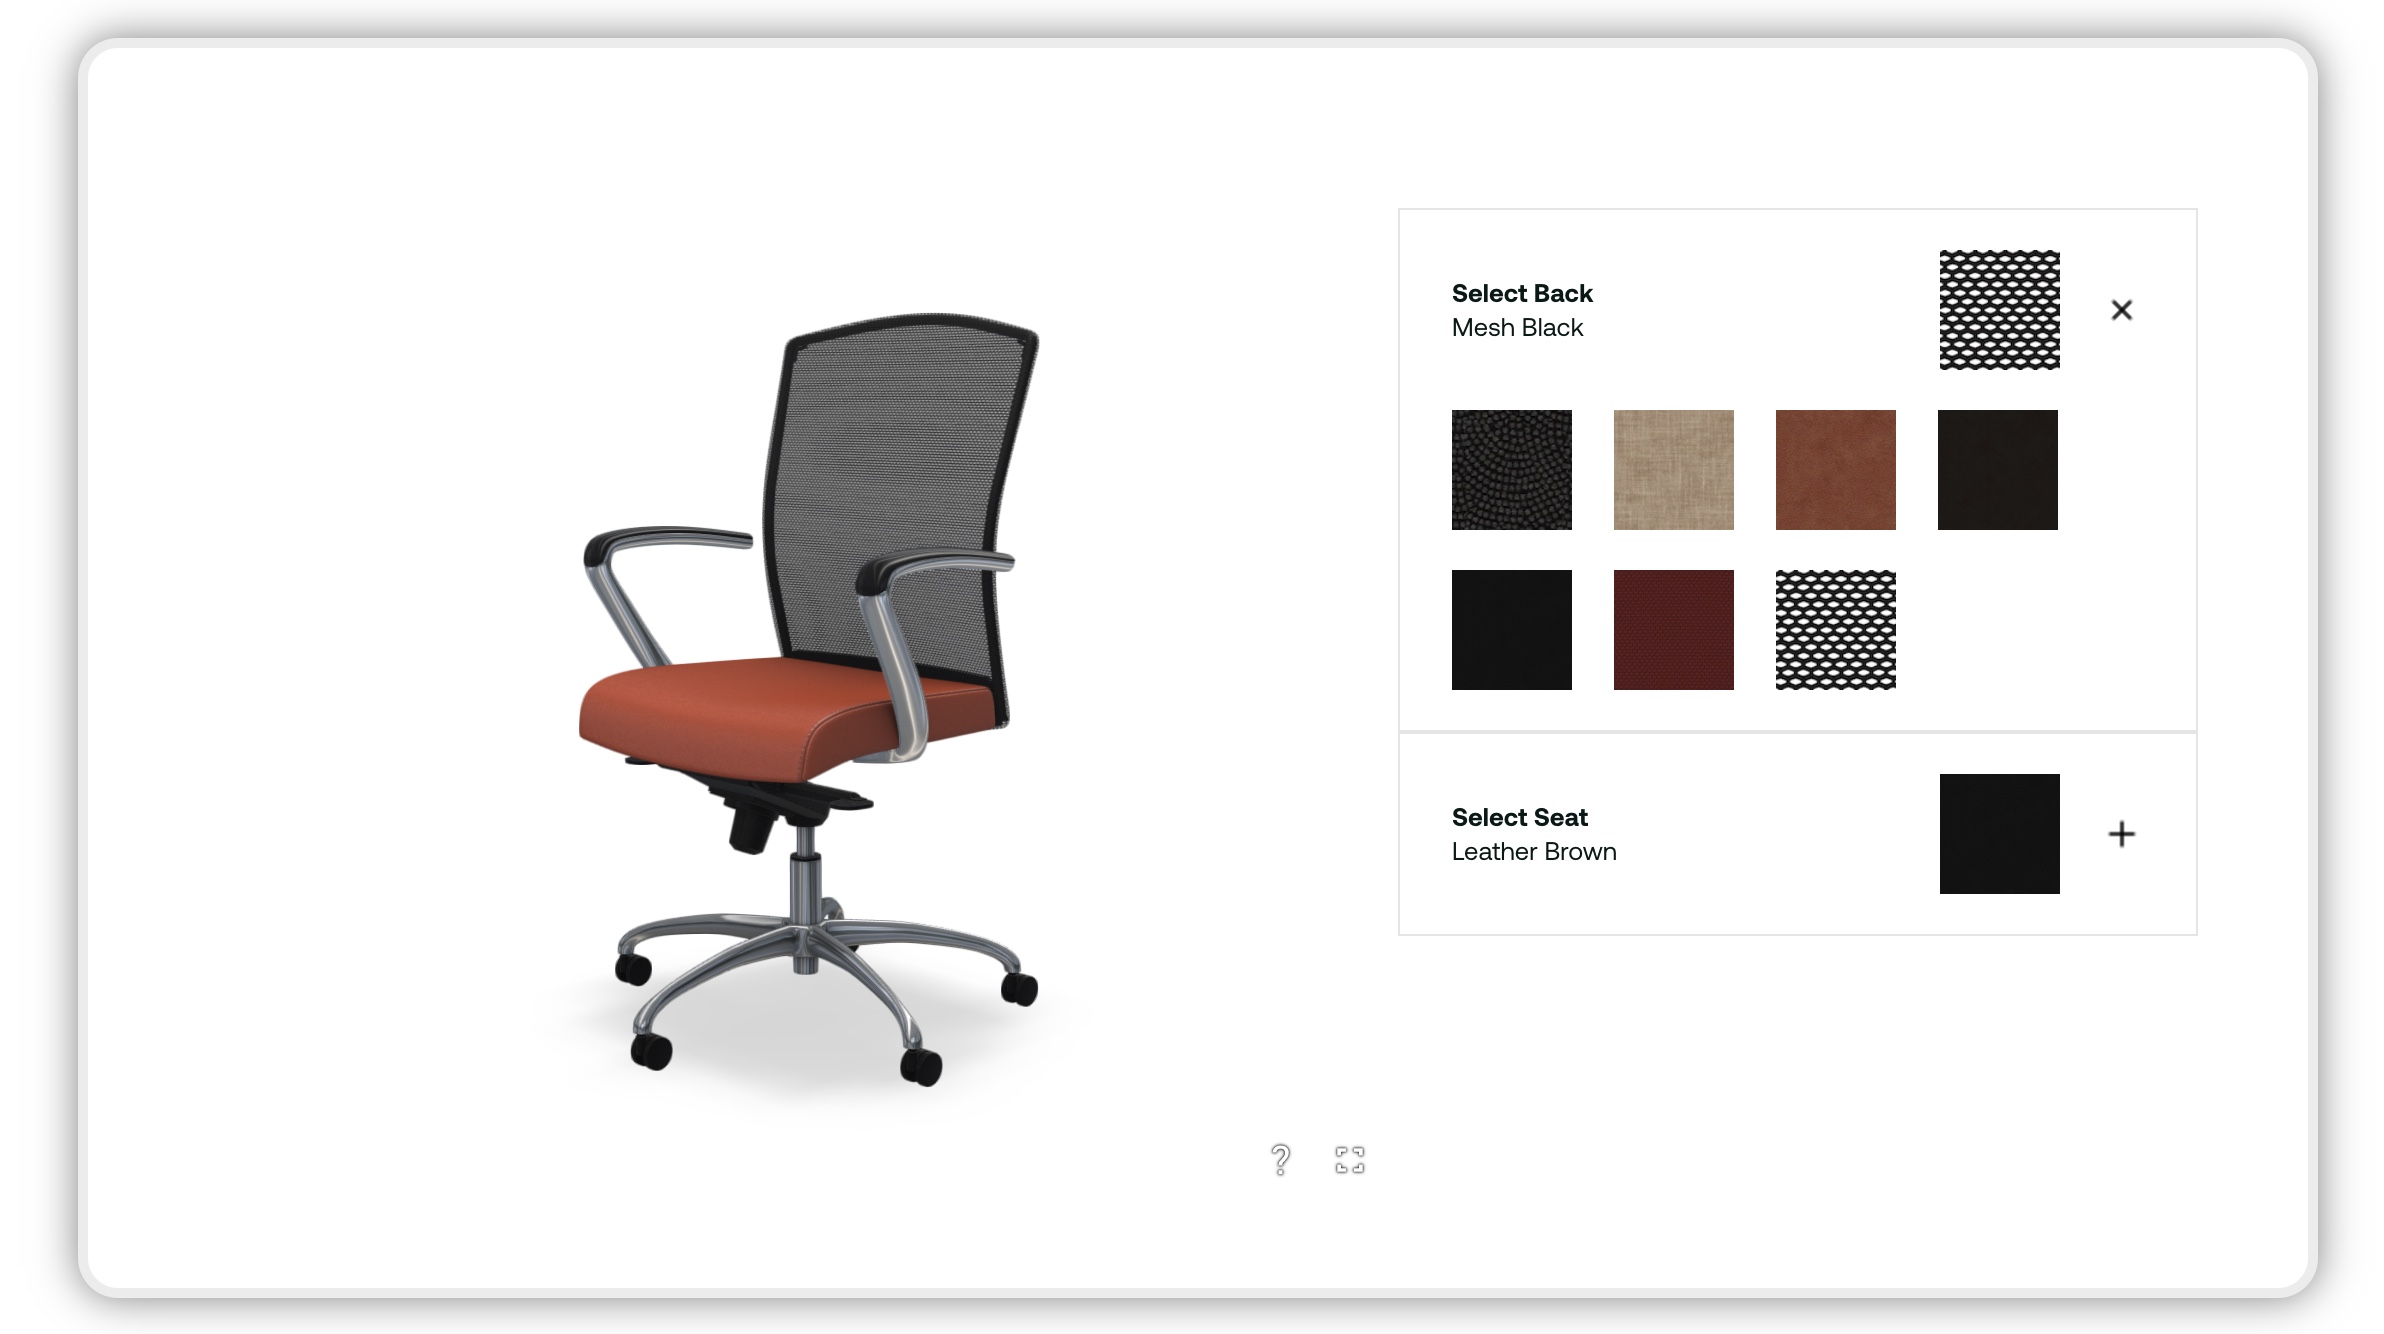 SAP product configurator of an office chair